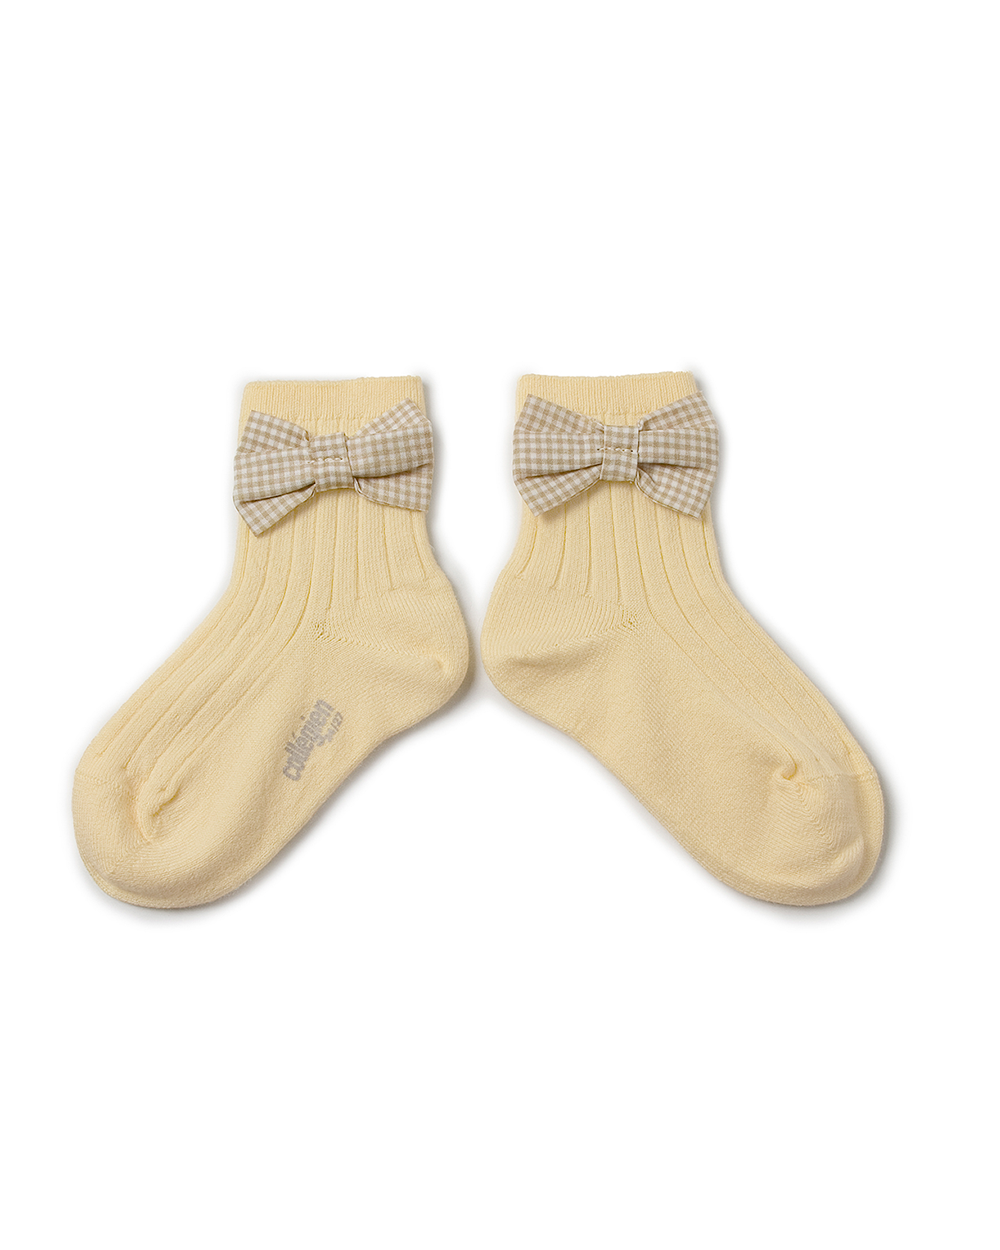 [Collégien] Colette - Ribbed Ankle Socks with Gingham bow - Vanille [24-27, 28-31]